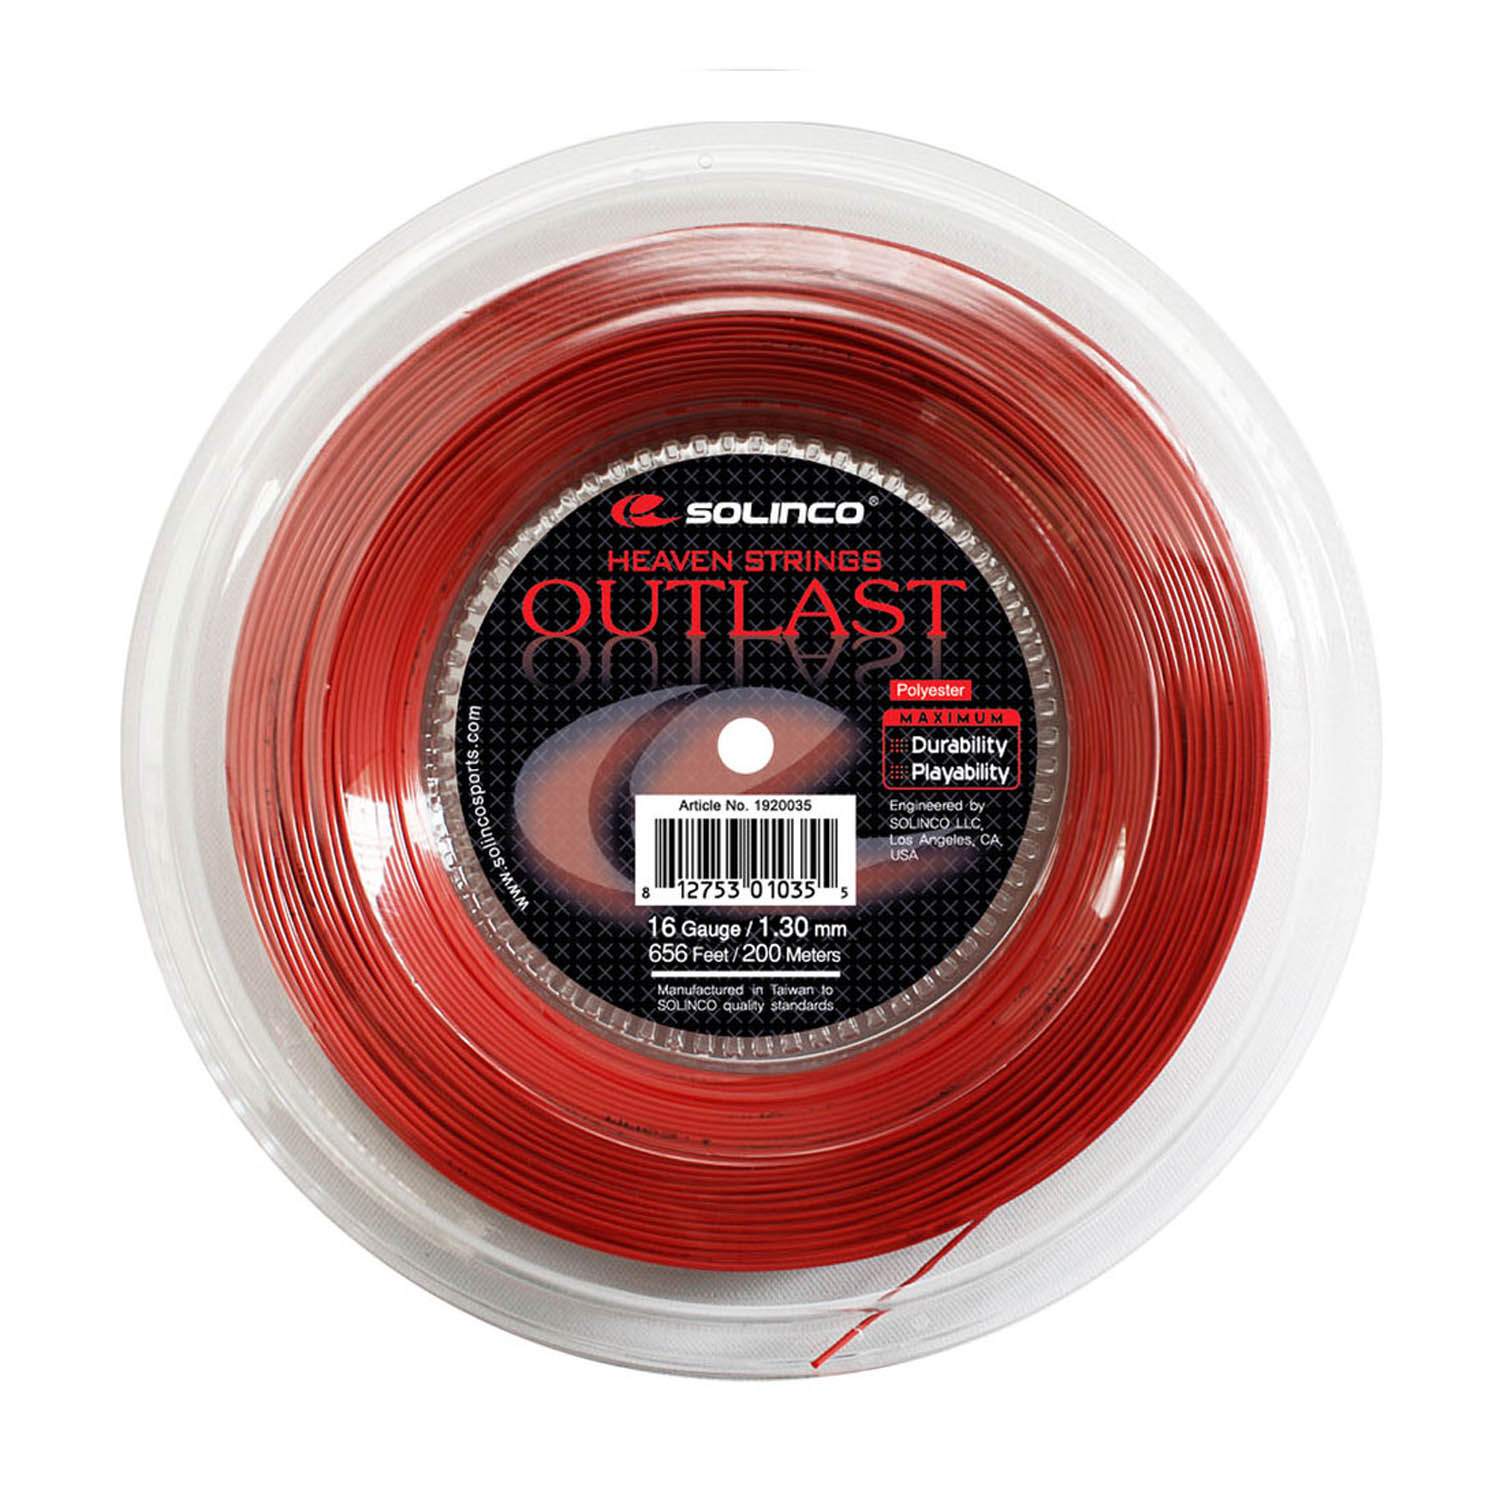 Solinco Outlast 1.30 200 m Reel - Red